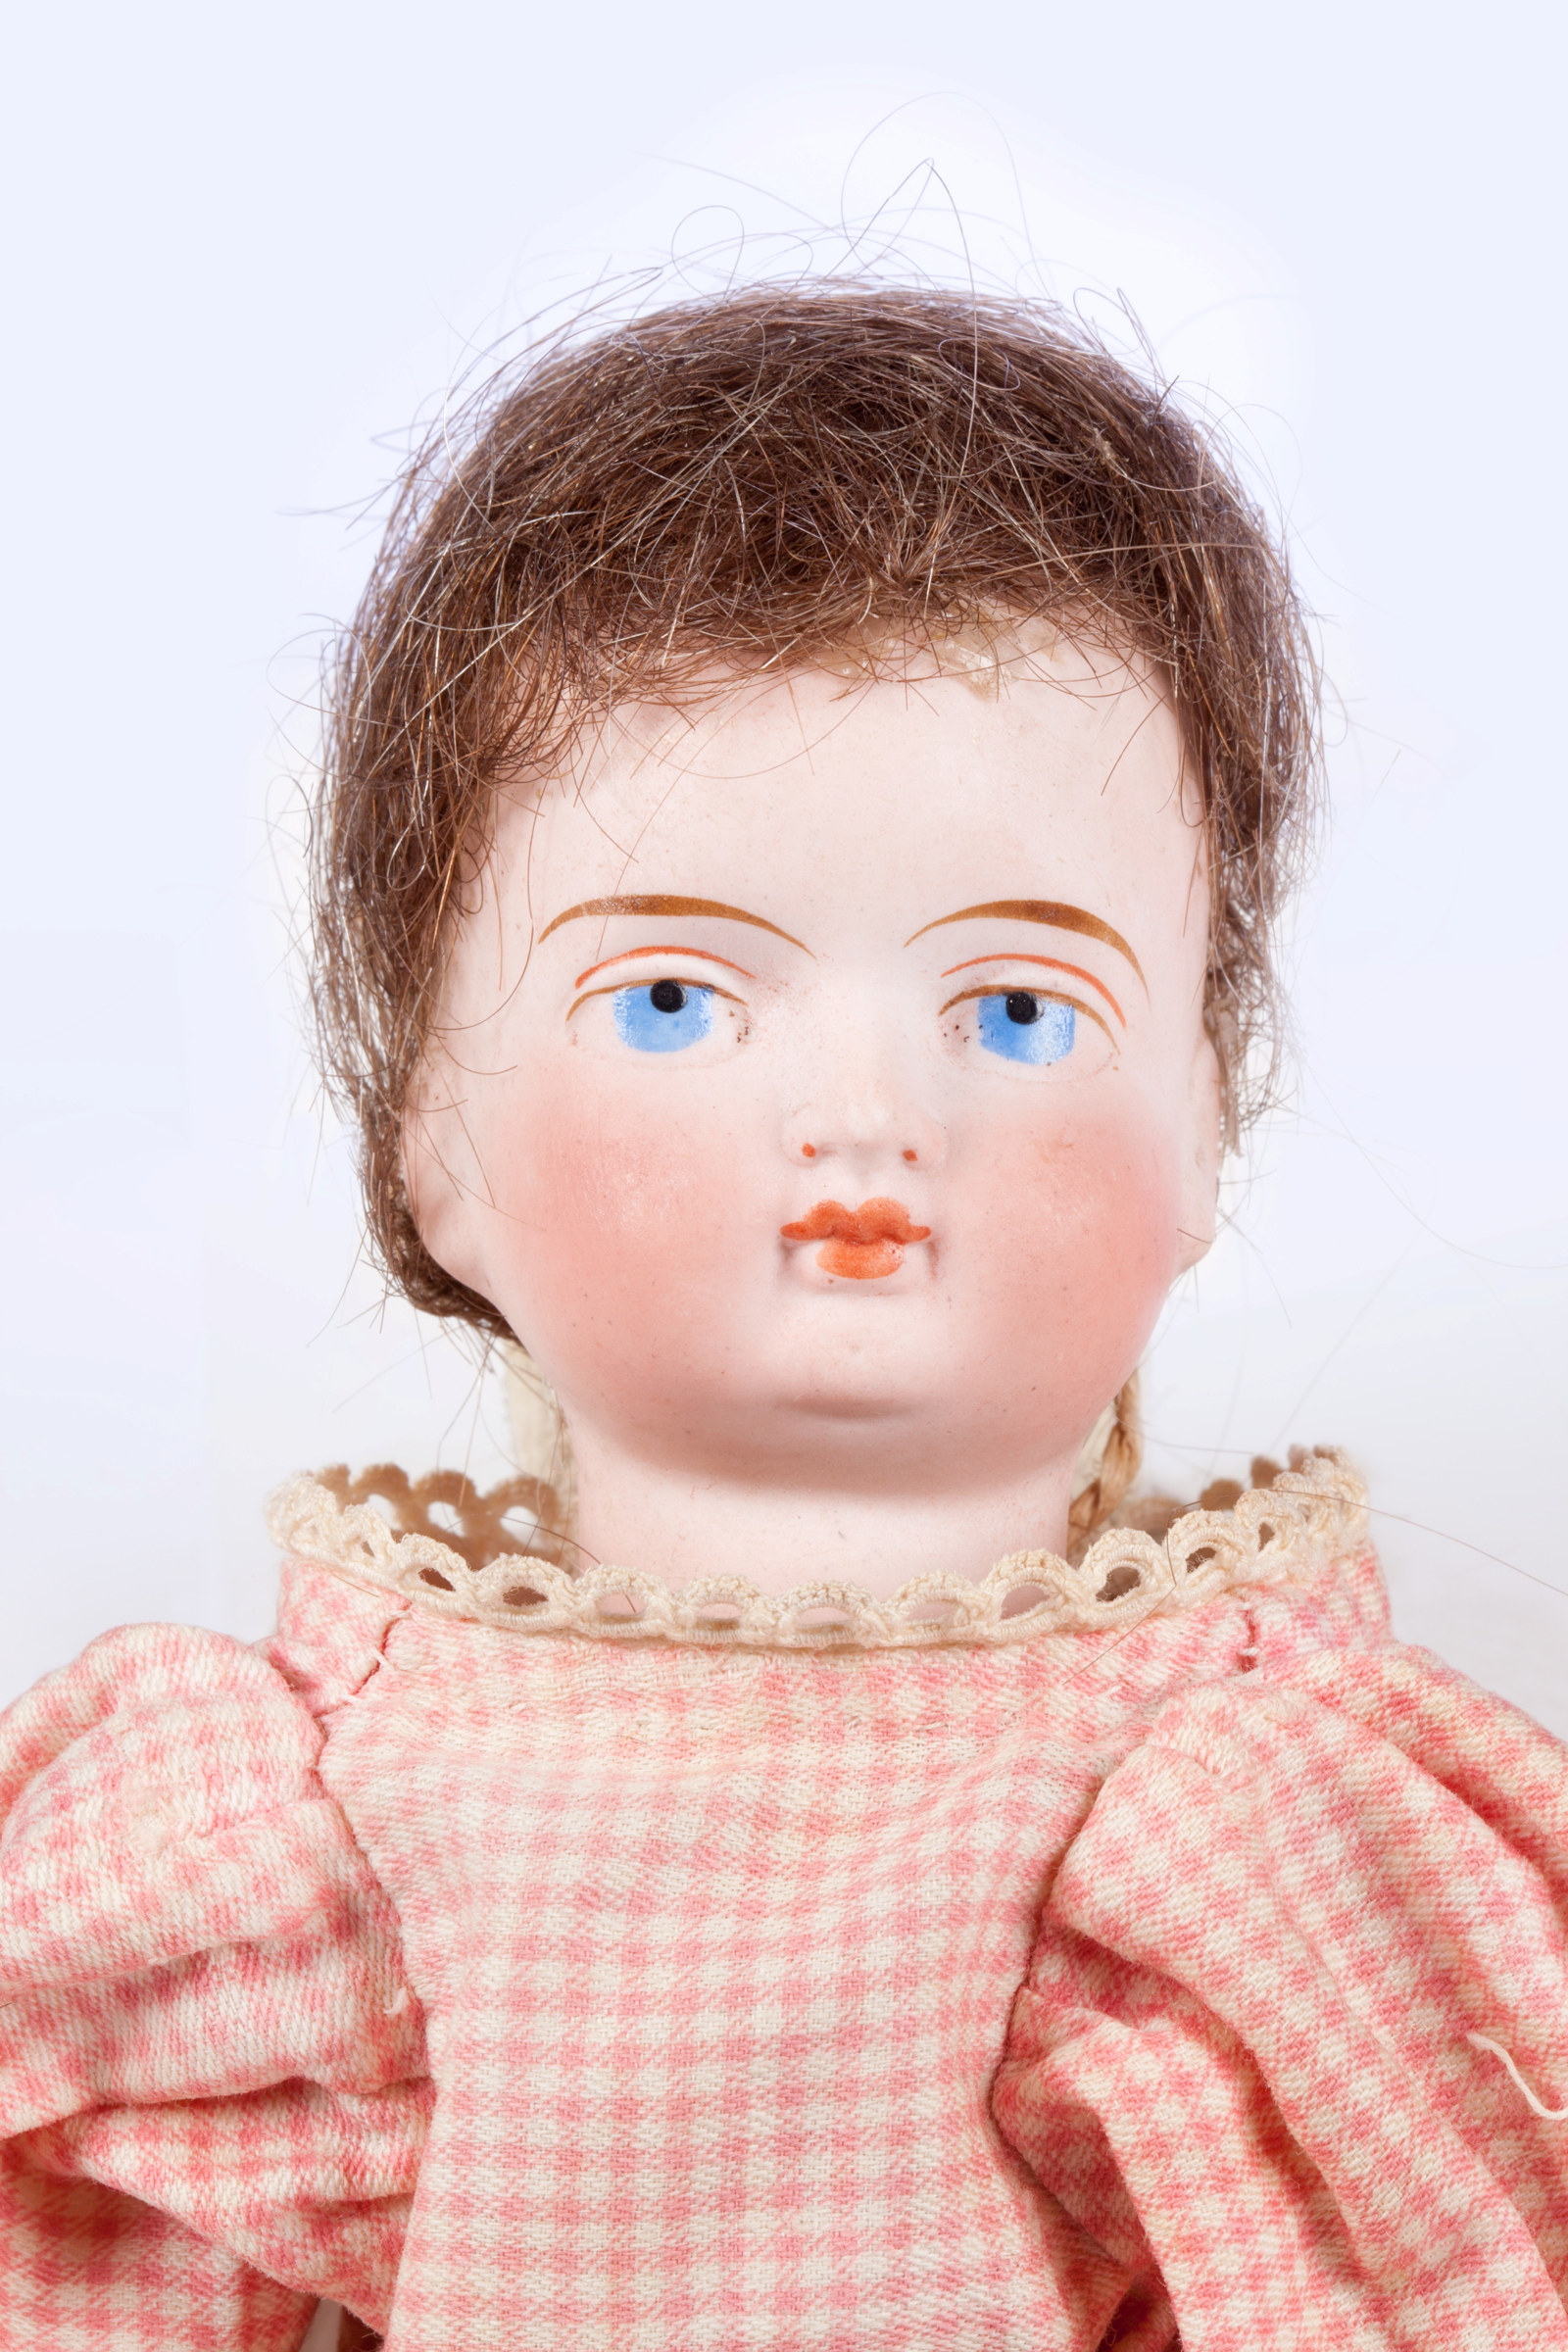 Blue eyed doll previously owned by Kathleen Rouse, c1880